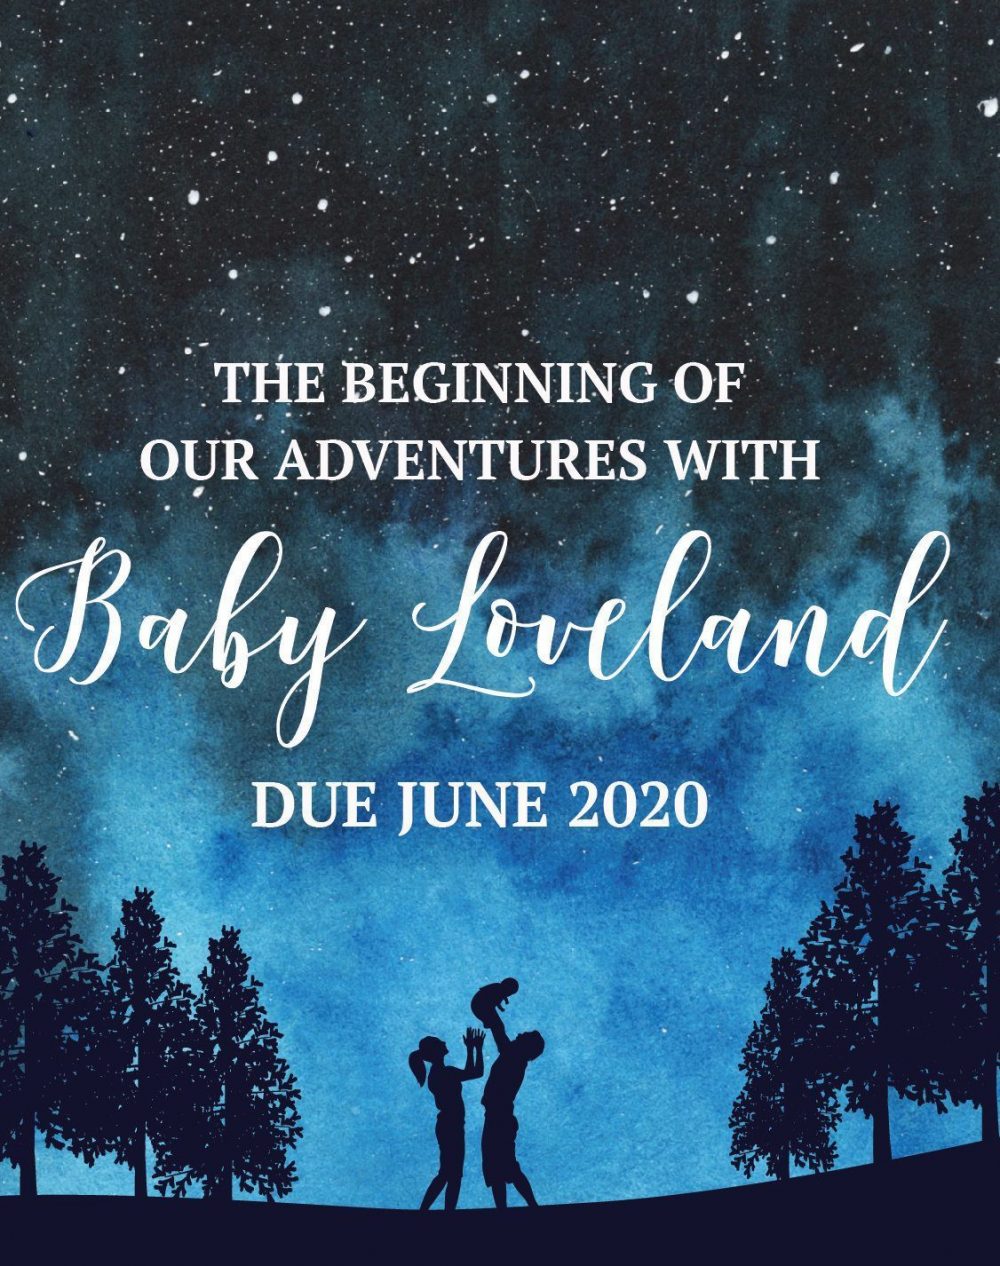 Baby Announcement Wine Label Stickers, "The Beginning of Our Adventures", Baby Celebration Custom Bottle Label, Night Fantasy Sky bwinelabel138